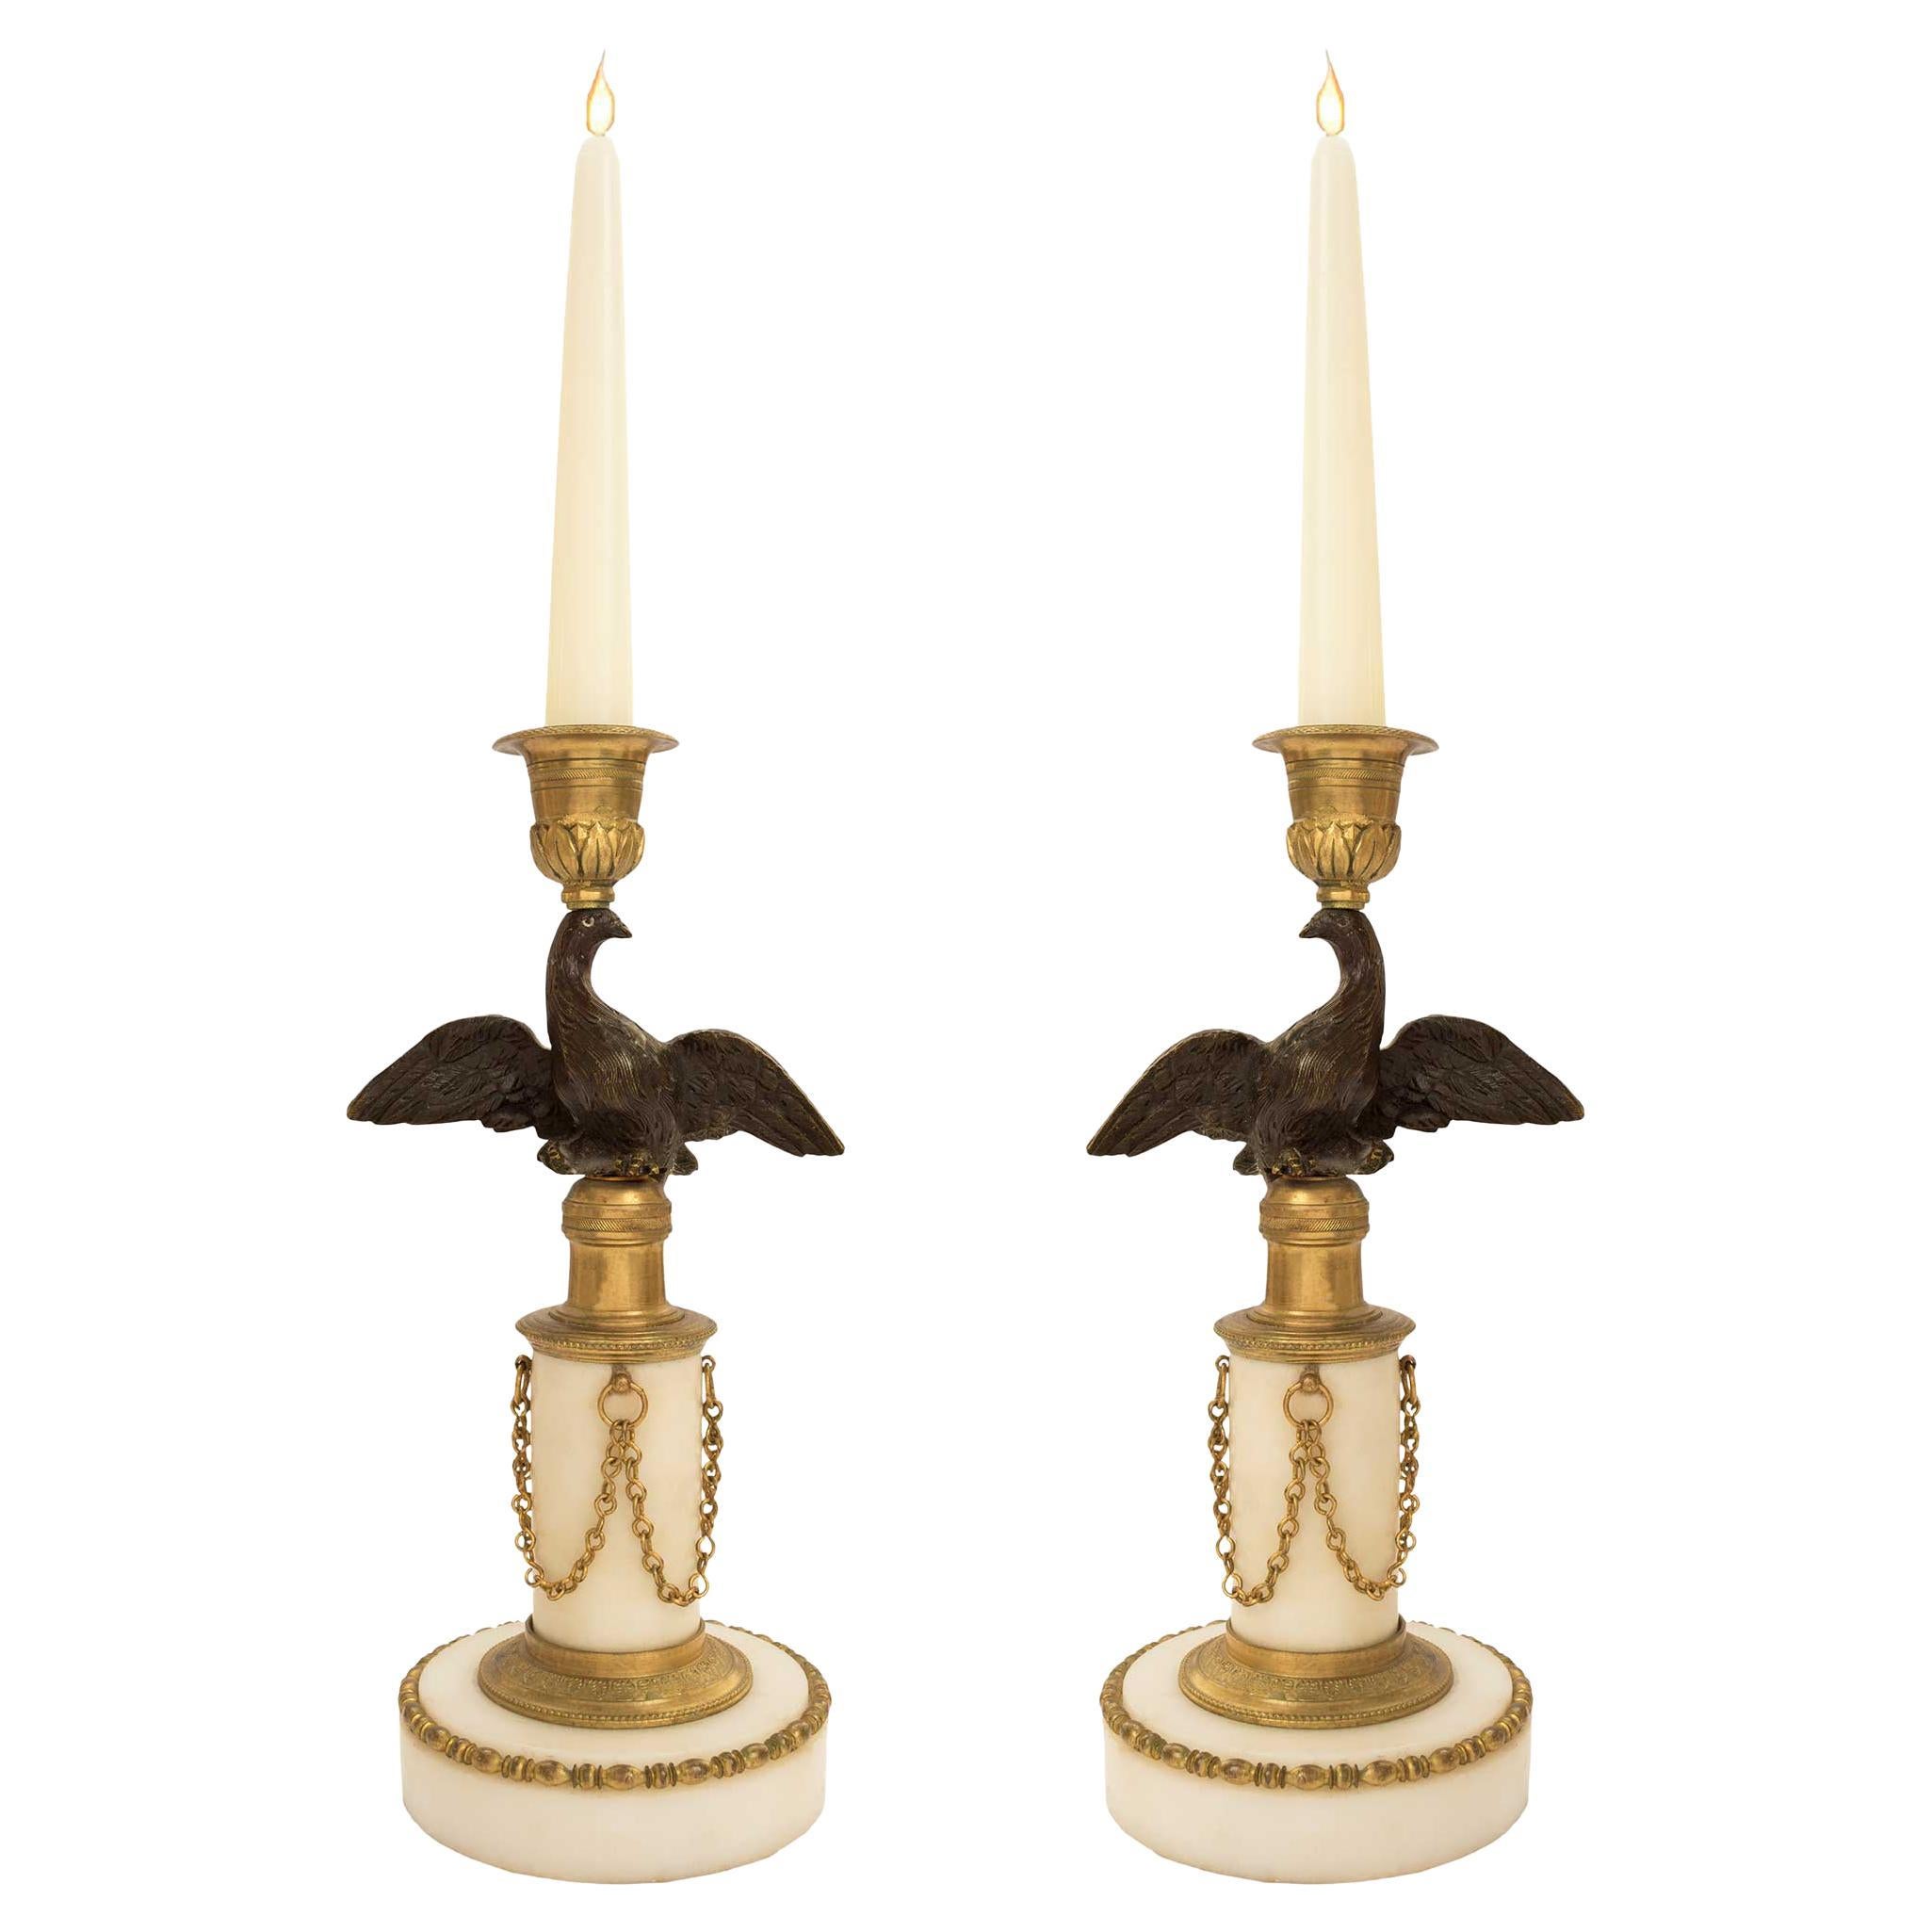 Pair of French 19th Century Neo-Classical St. White Carrara Marble Candlesticks